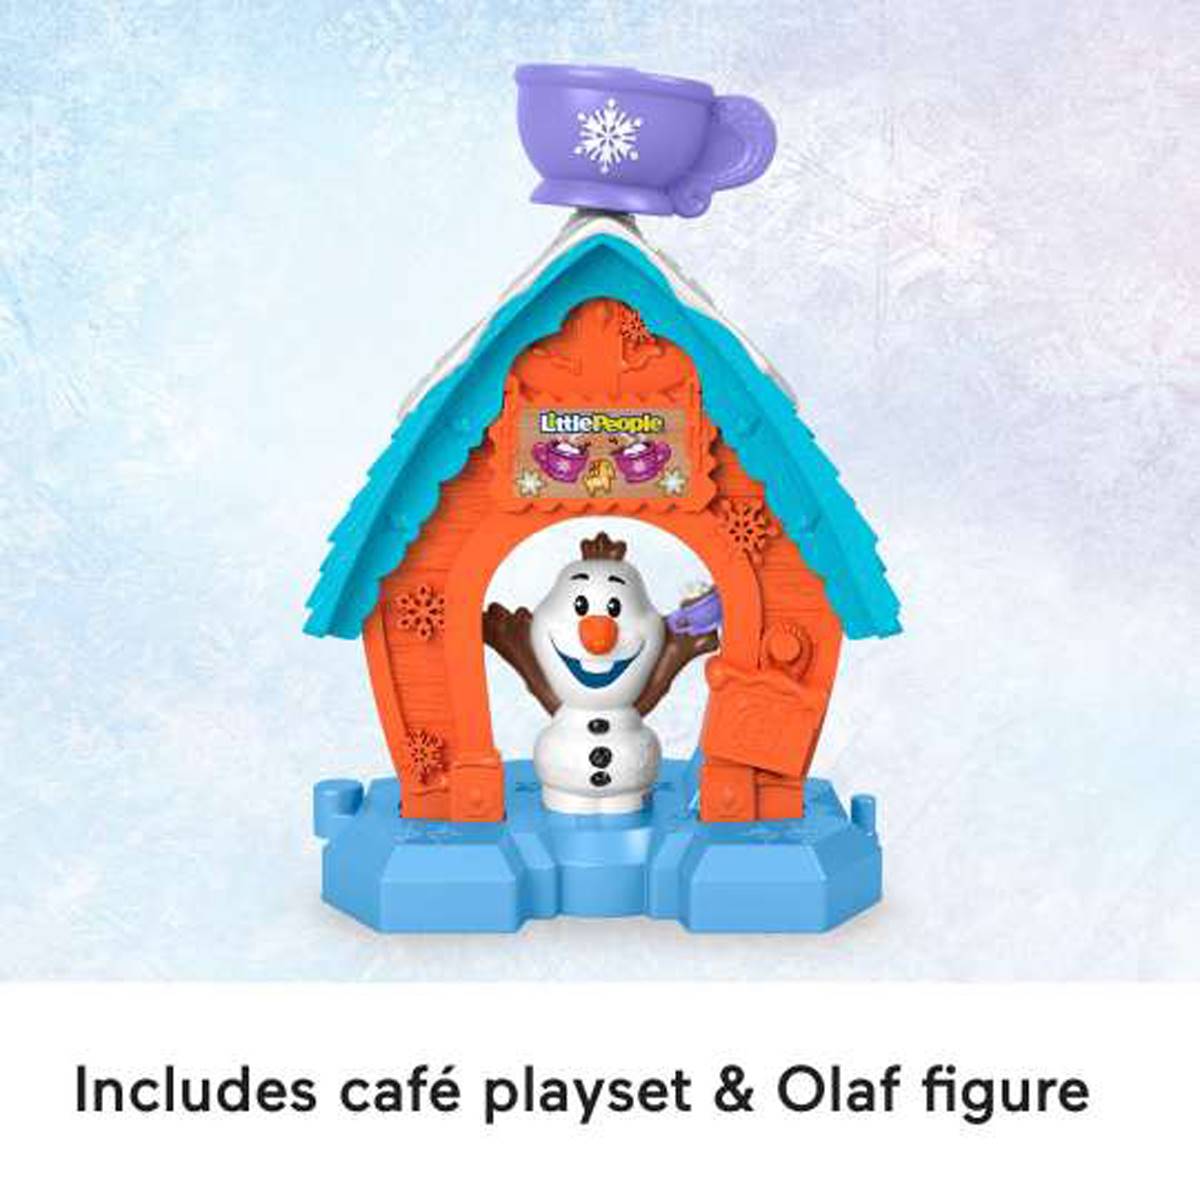 Fisher-Price(R) Little People(R) Frozen Olaf's Cafe